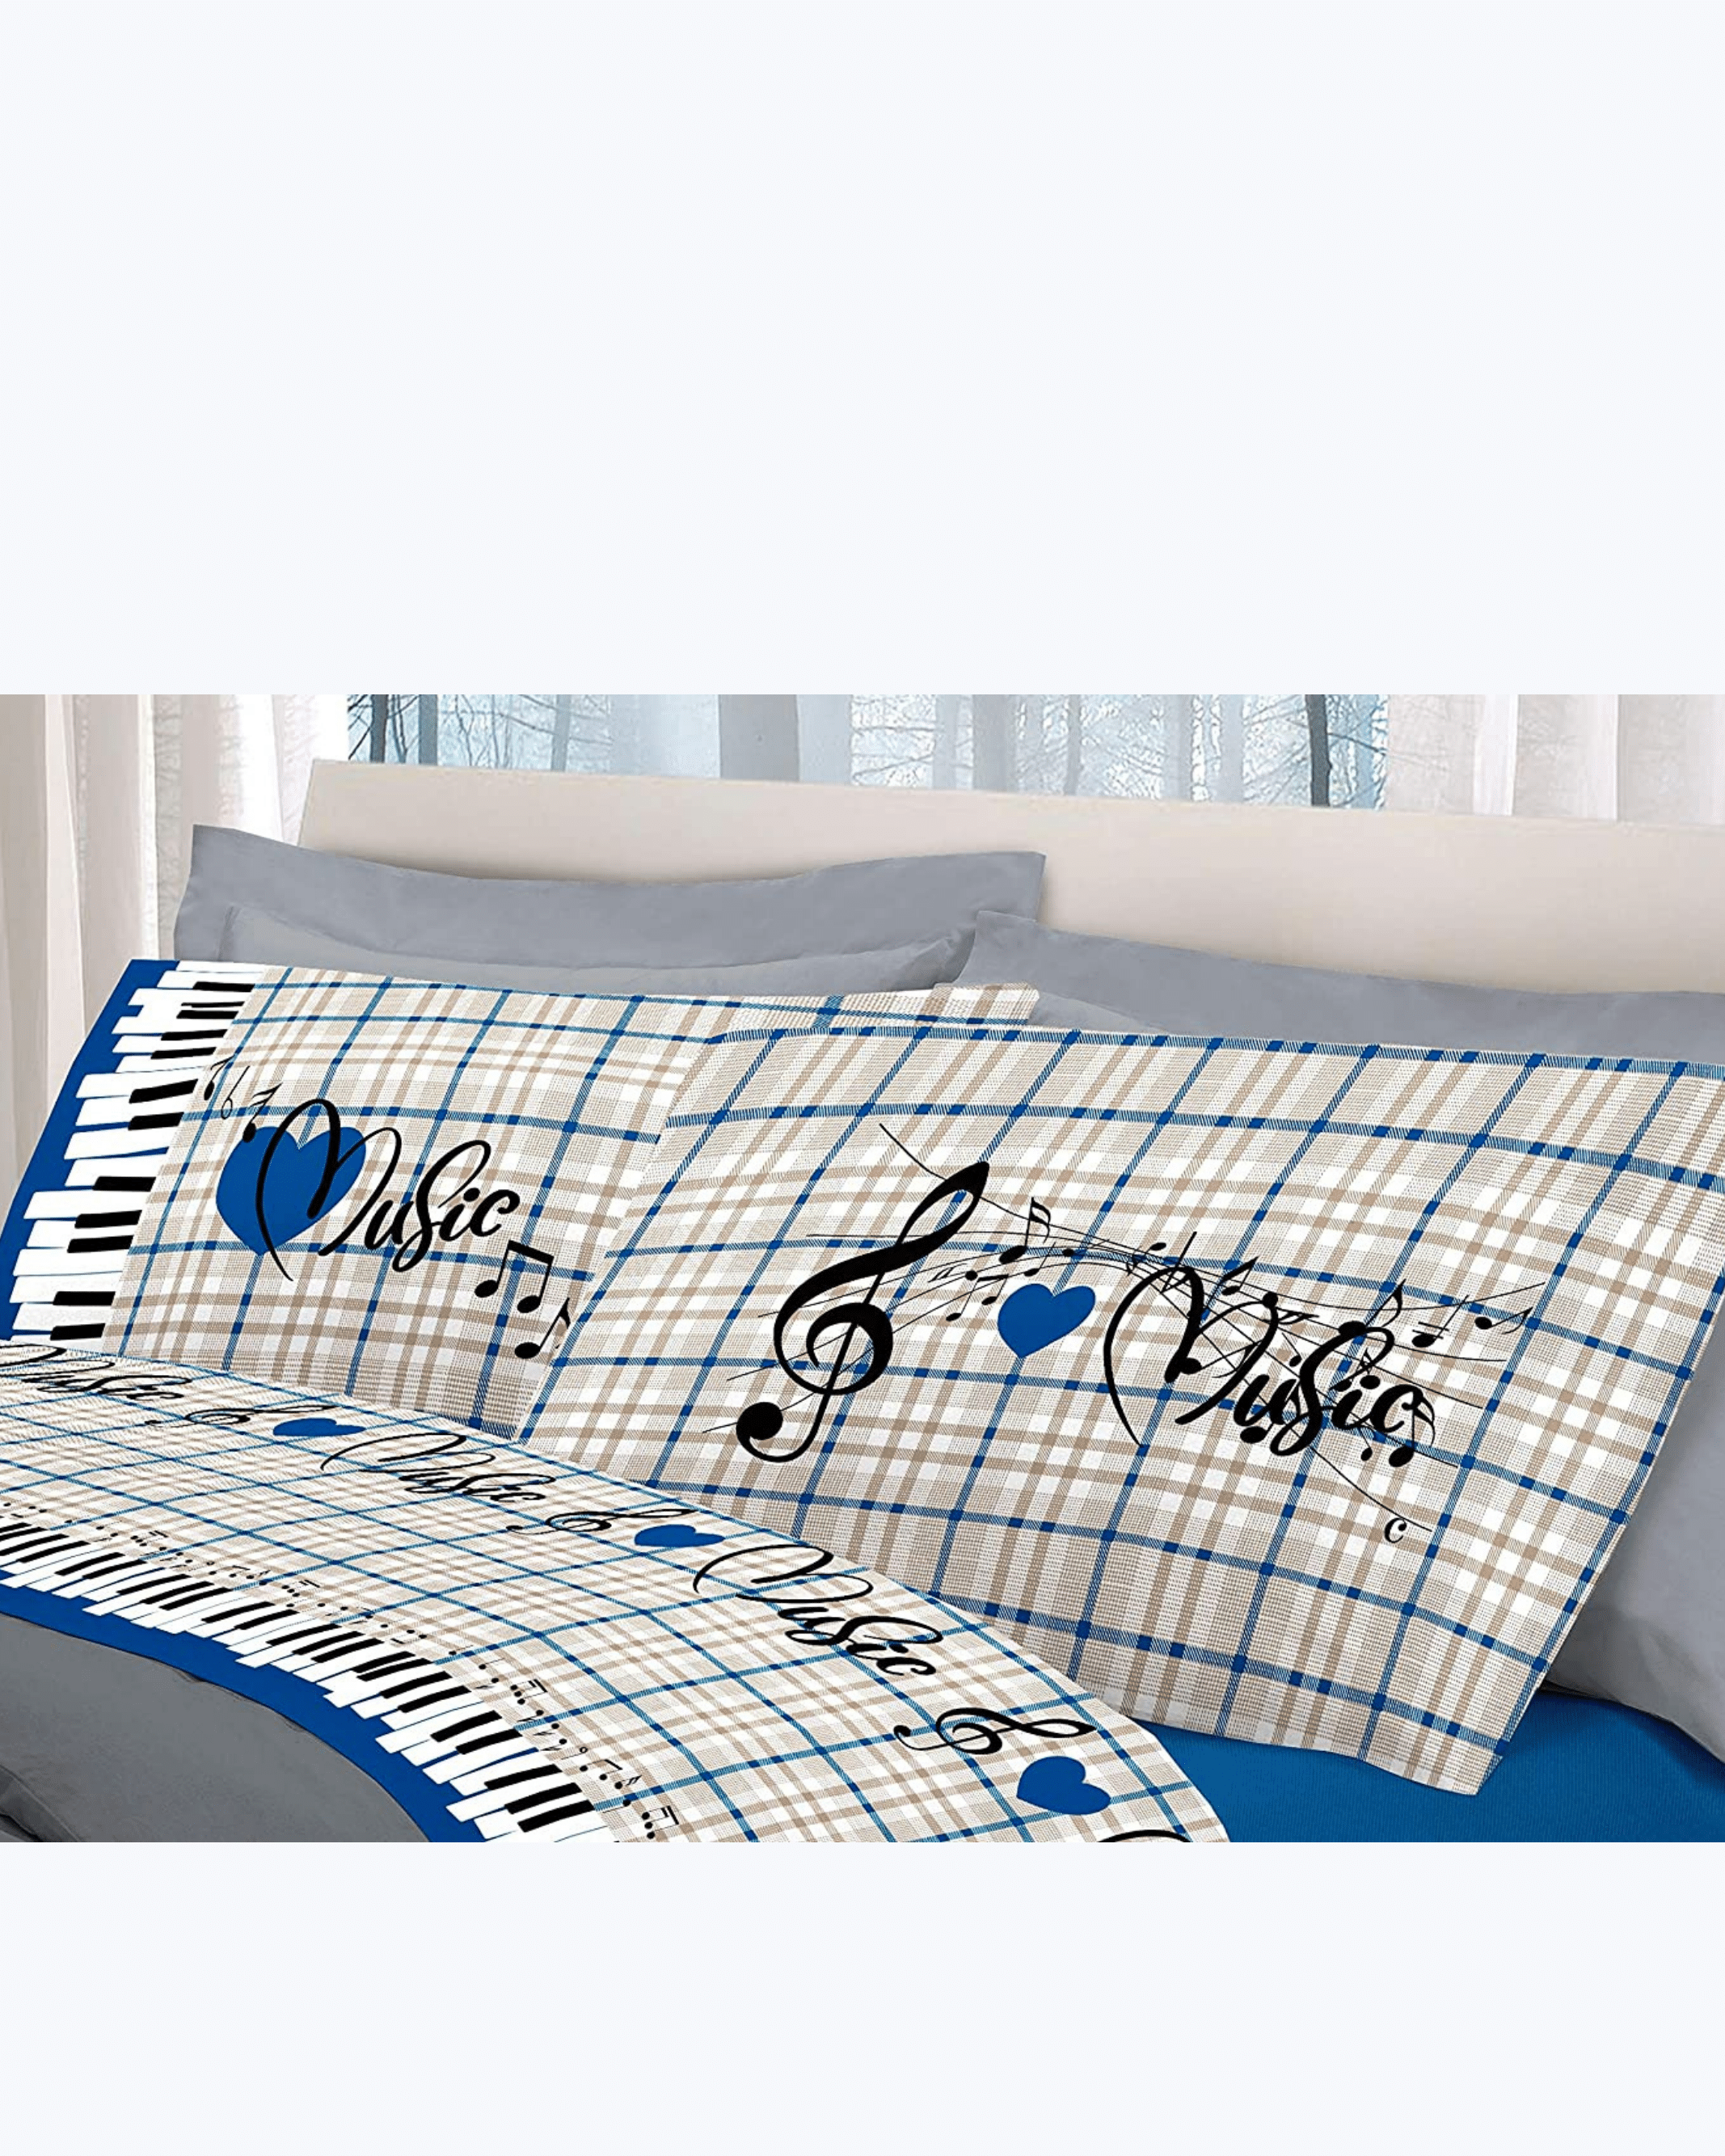 Set Lenzuola Letto in Cotone Made in Italy - Completo Letto Stampa Note Musicali